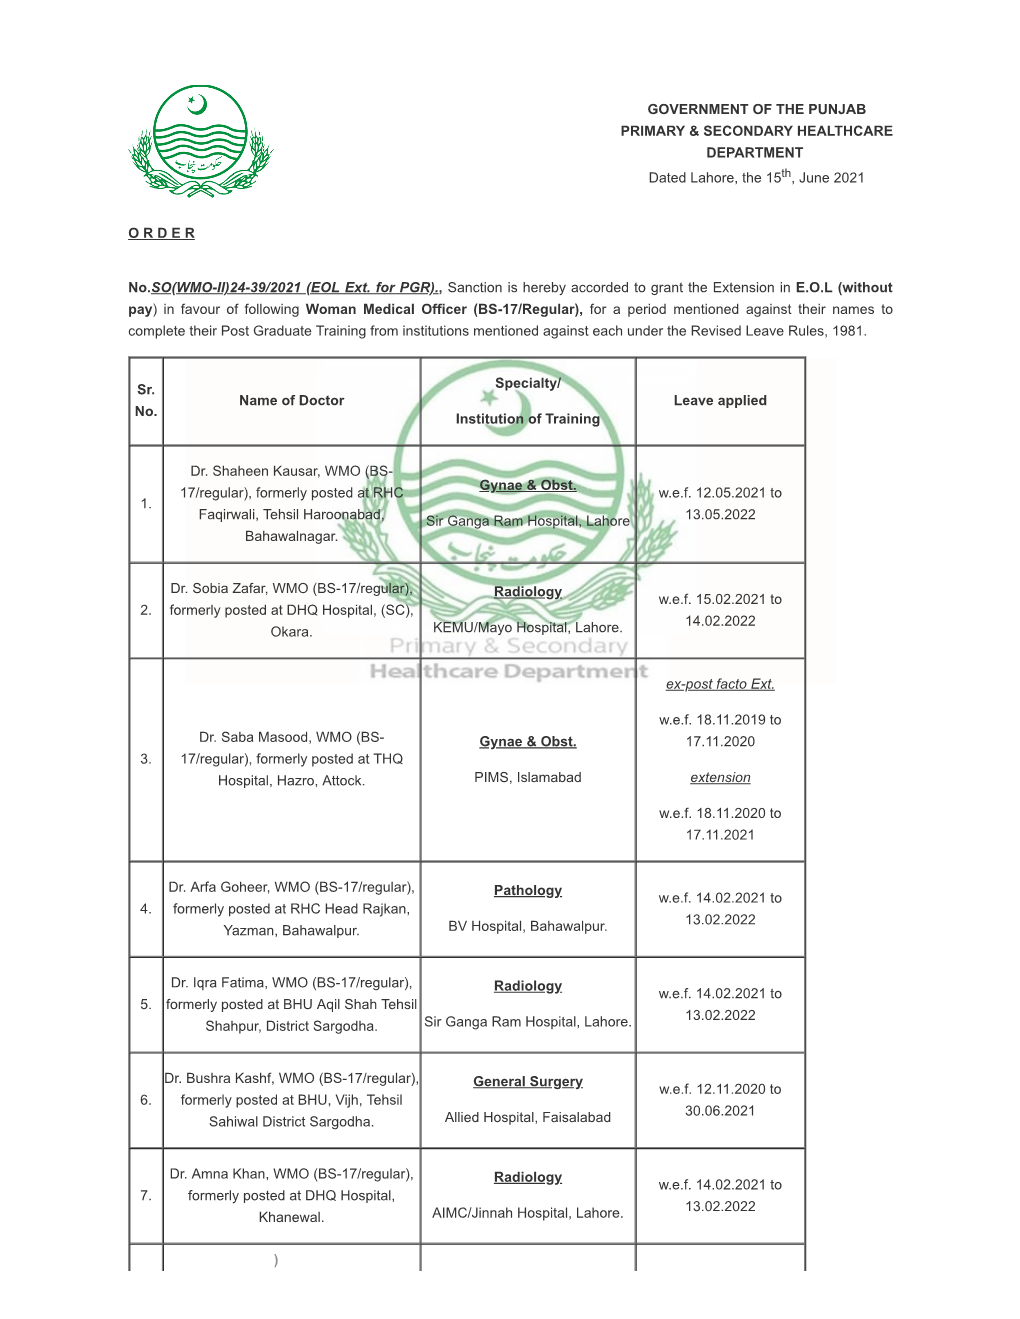 Government of the Punjab Primary & Secondary